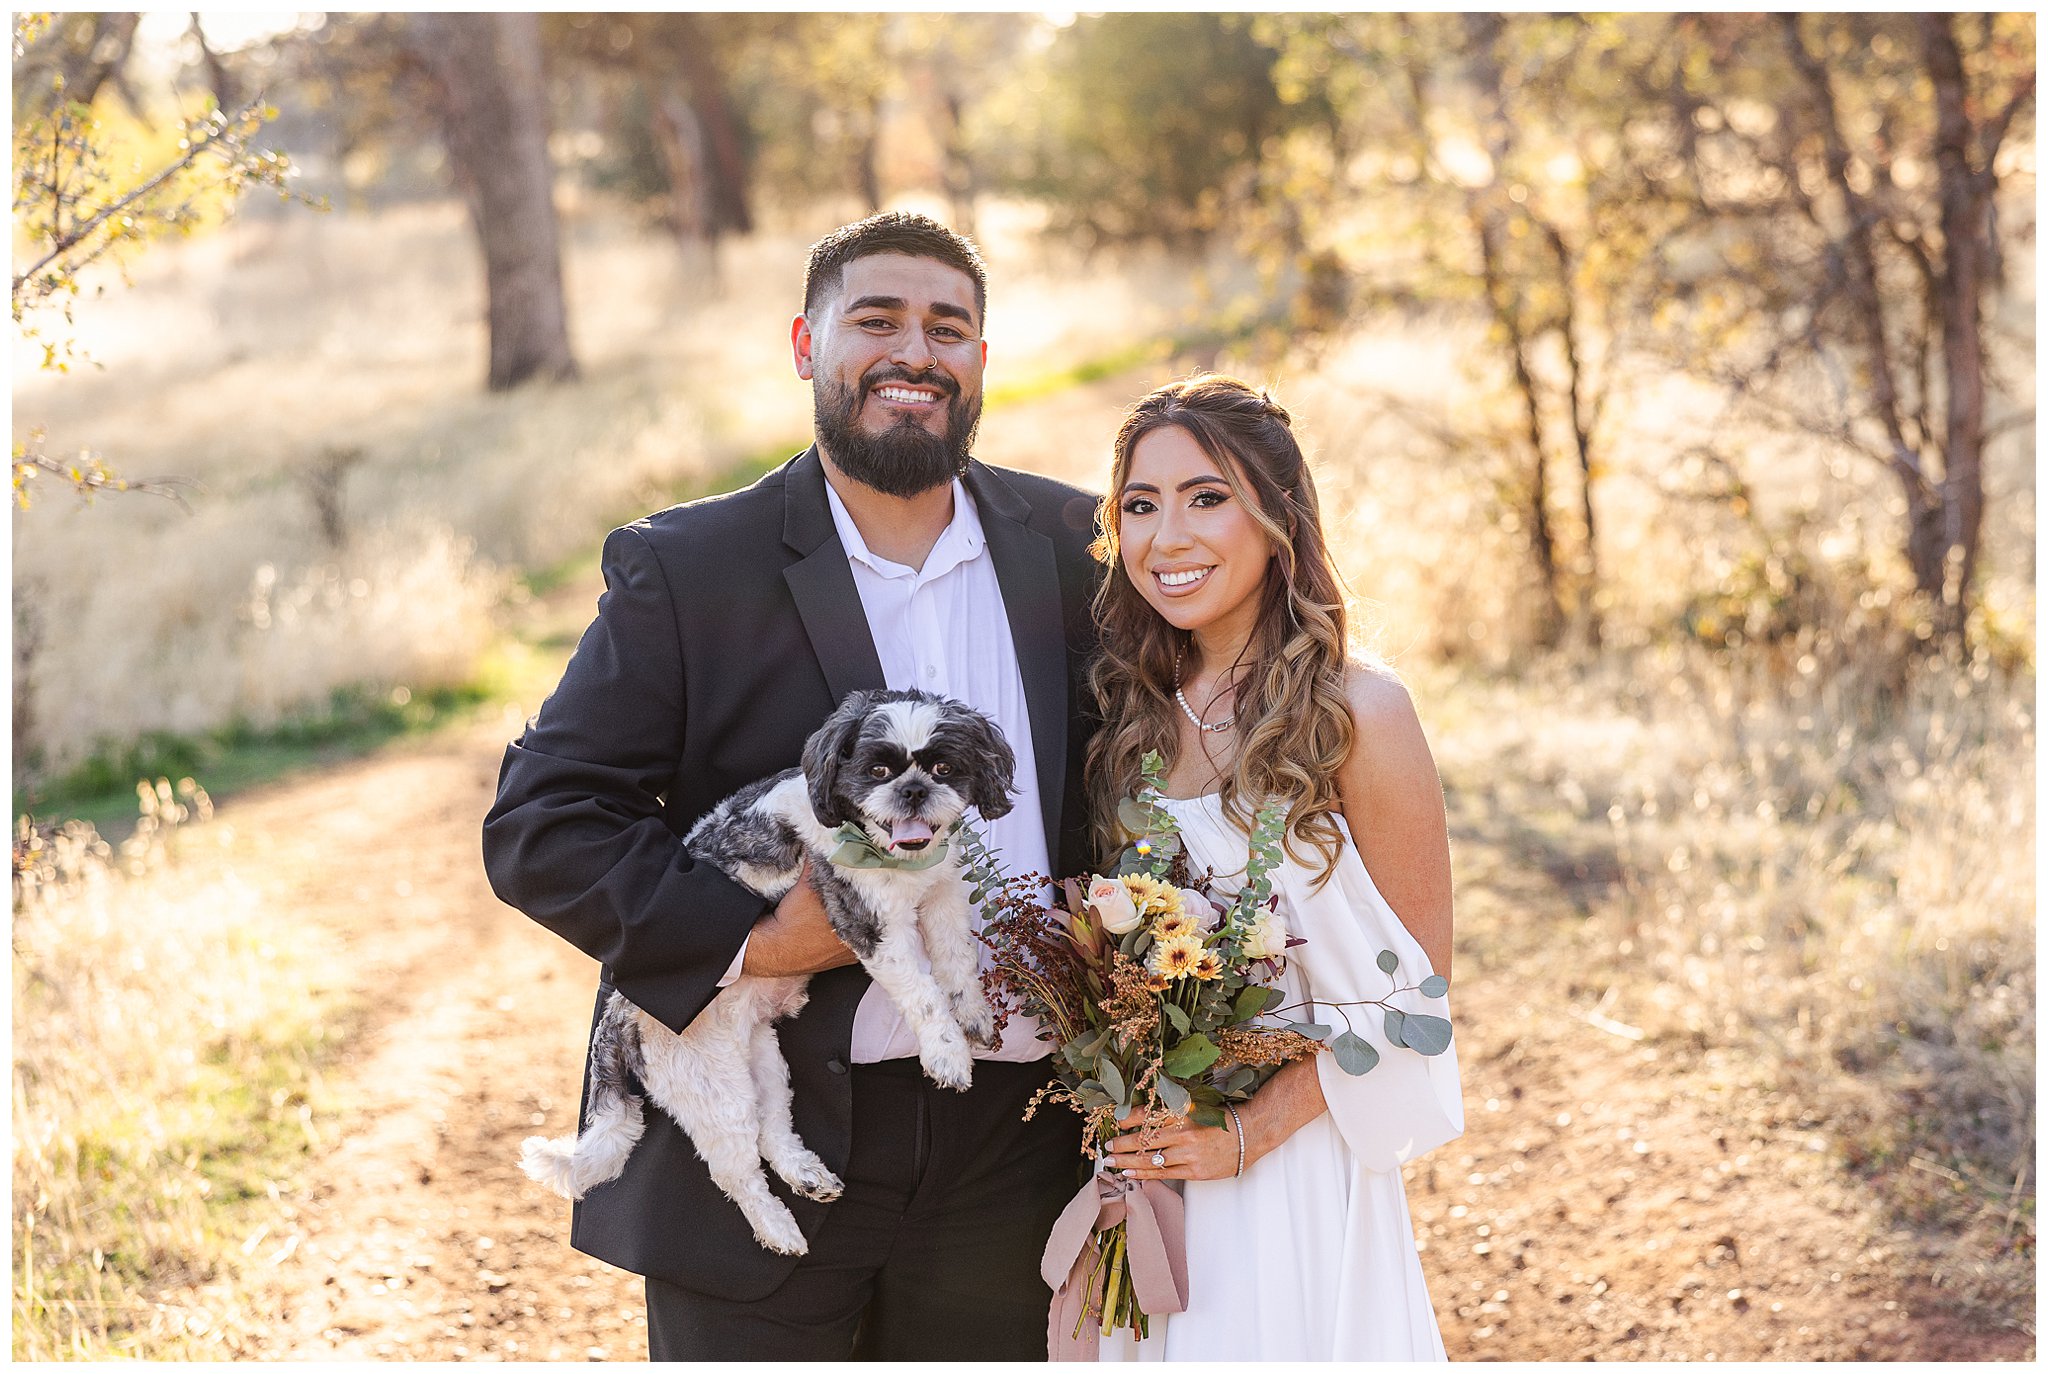 Upper Bidwell Park Engagemet Session September Fall Boho Black Suit White Gown Dog Bouquet Champagne Trail,